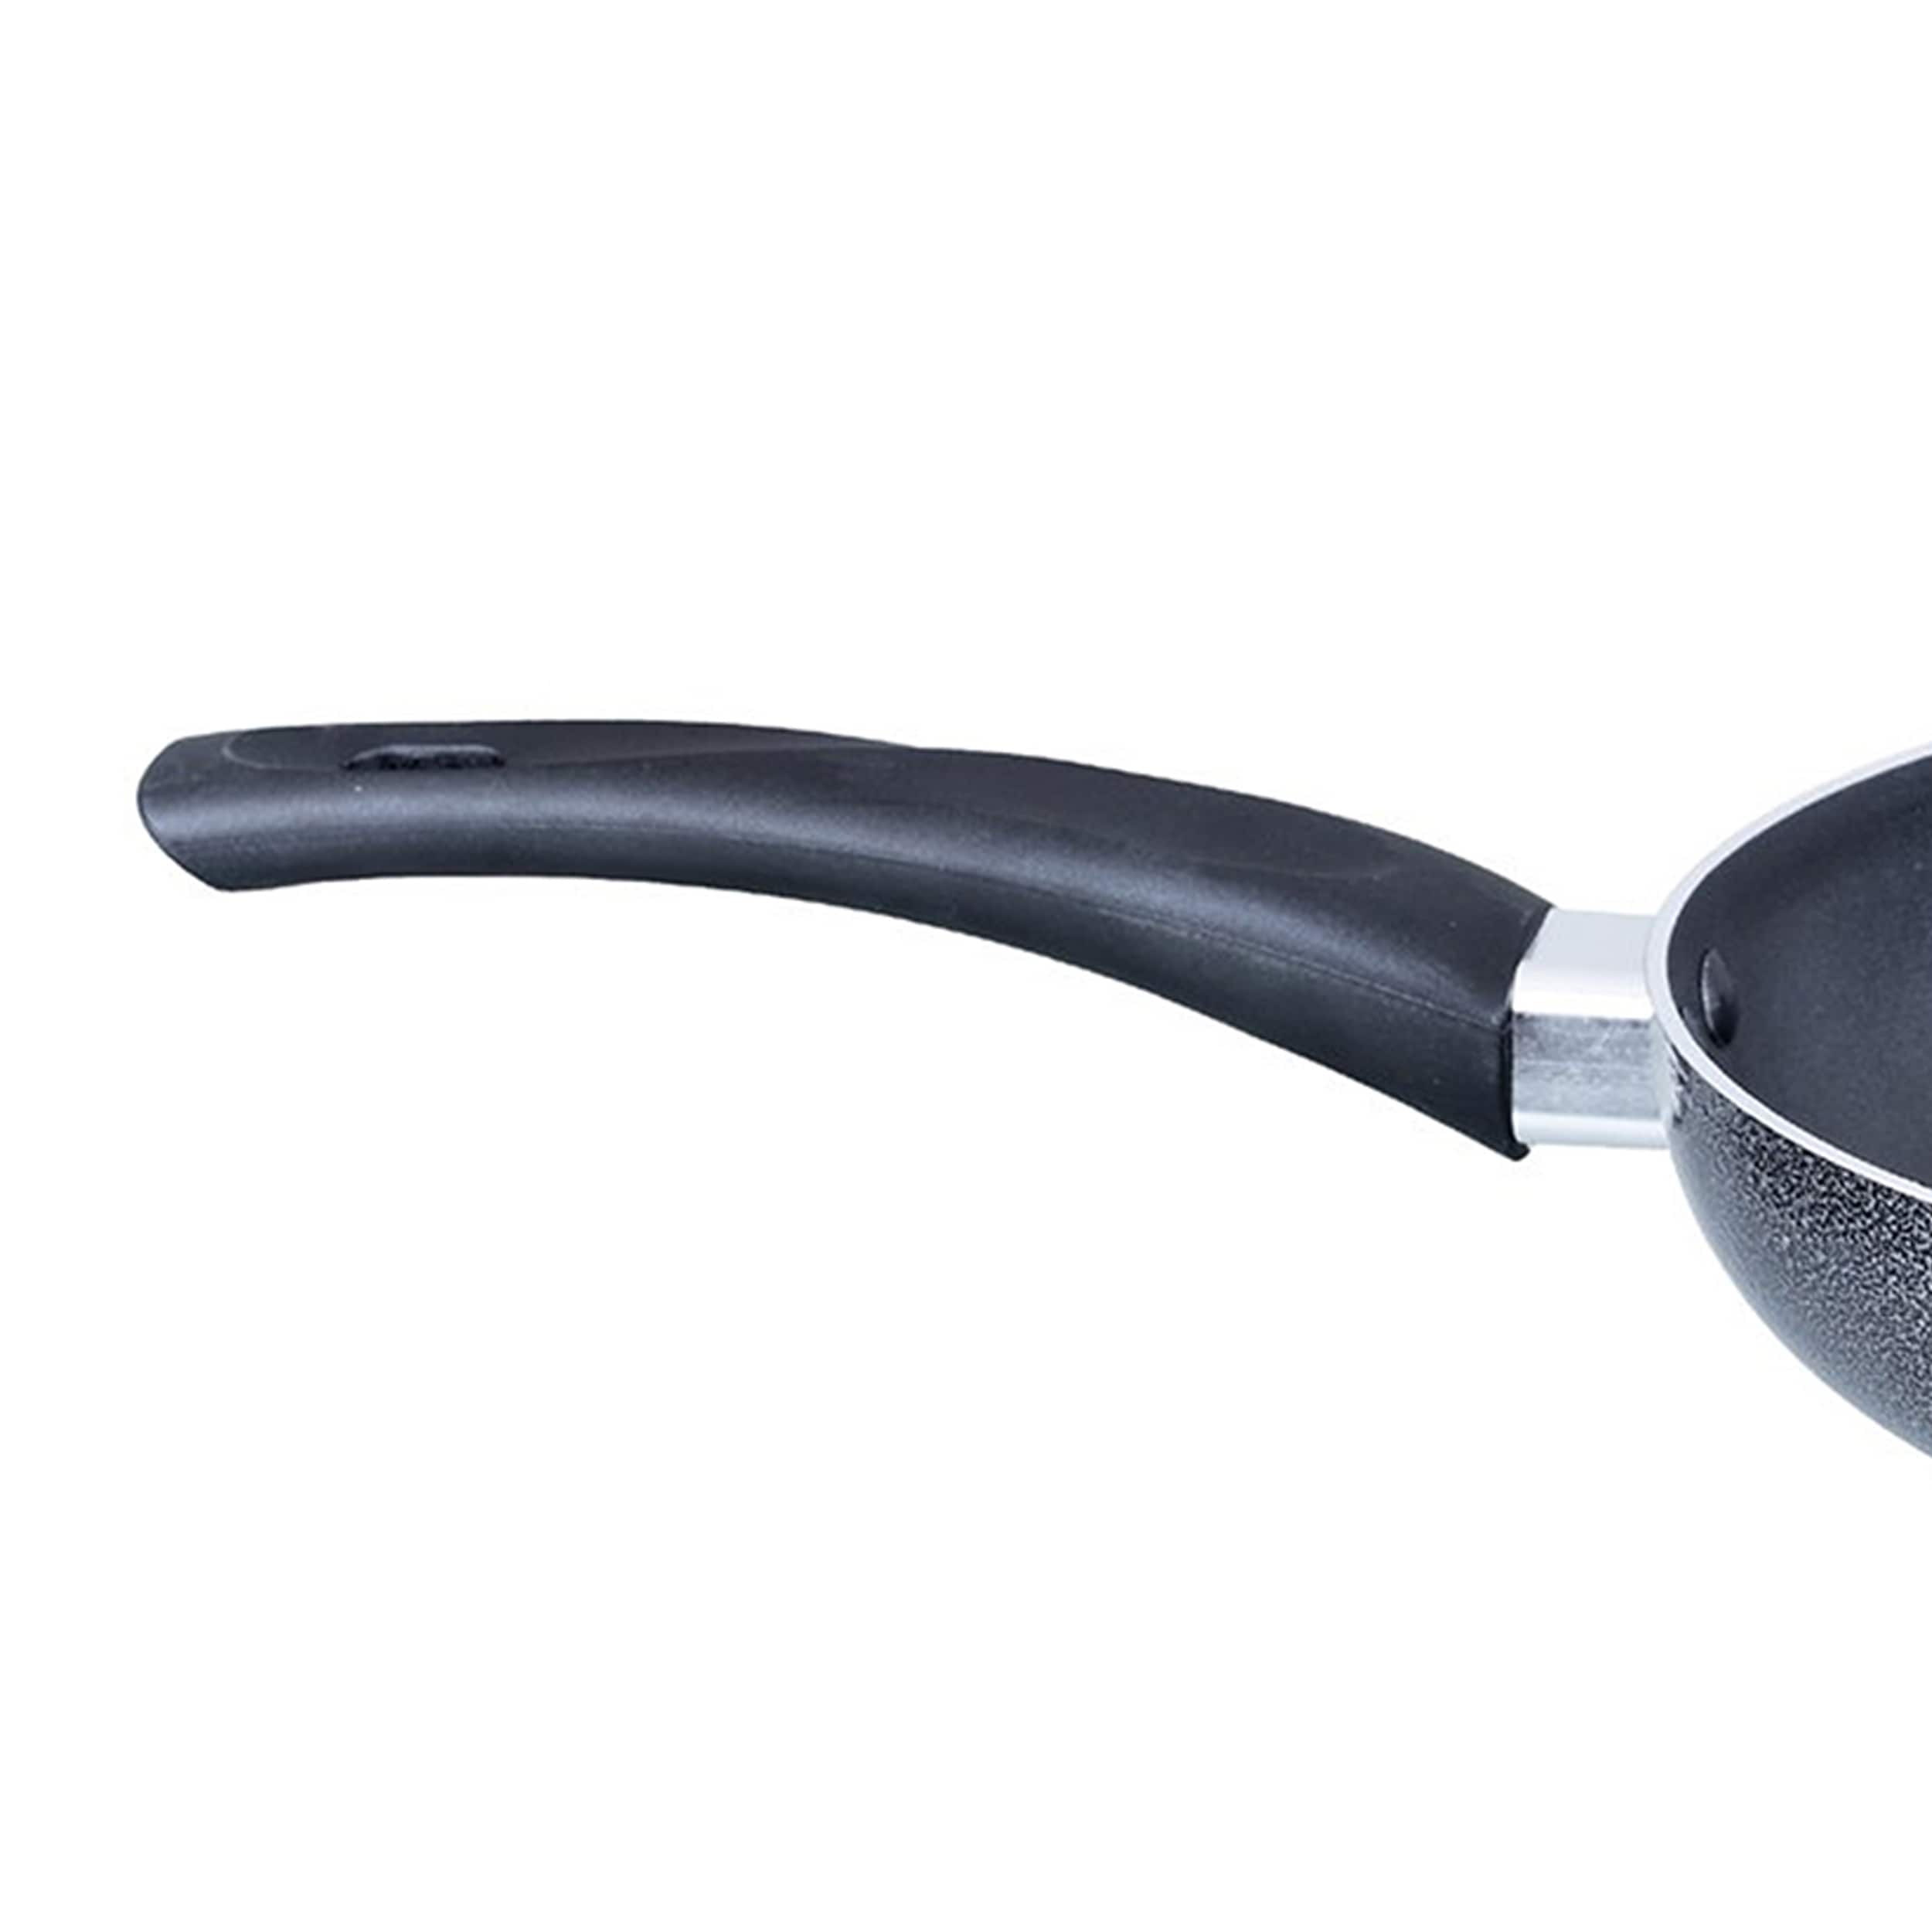 https://ak1.ostkcdn.com/images/products/is/images/direct/0cd3e05325f15aebf42bb2861d078305281ee944/Brentwood-Frying-Pan-Aluminum-Non-Stick-7%22-Gray.jpg